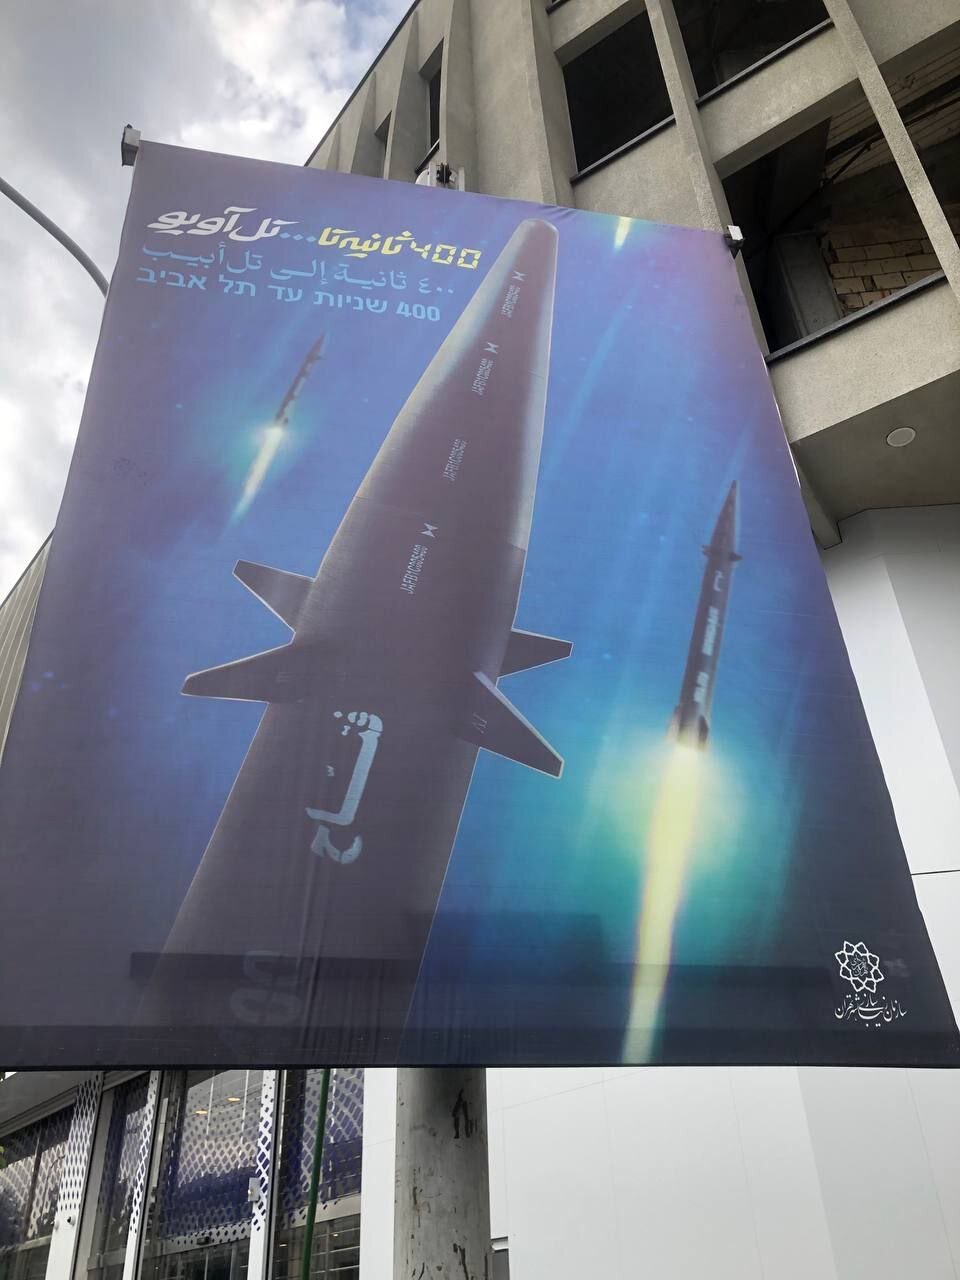 A banner Tehran claiming that the new hypersonic missile could reach Israel in 400 seconds